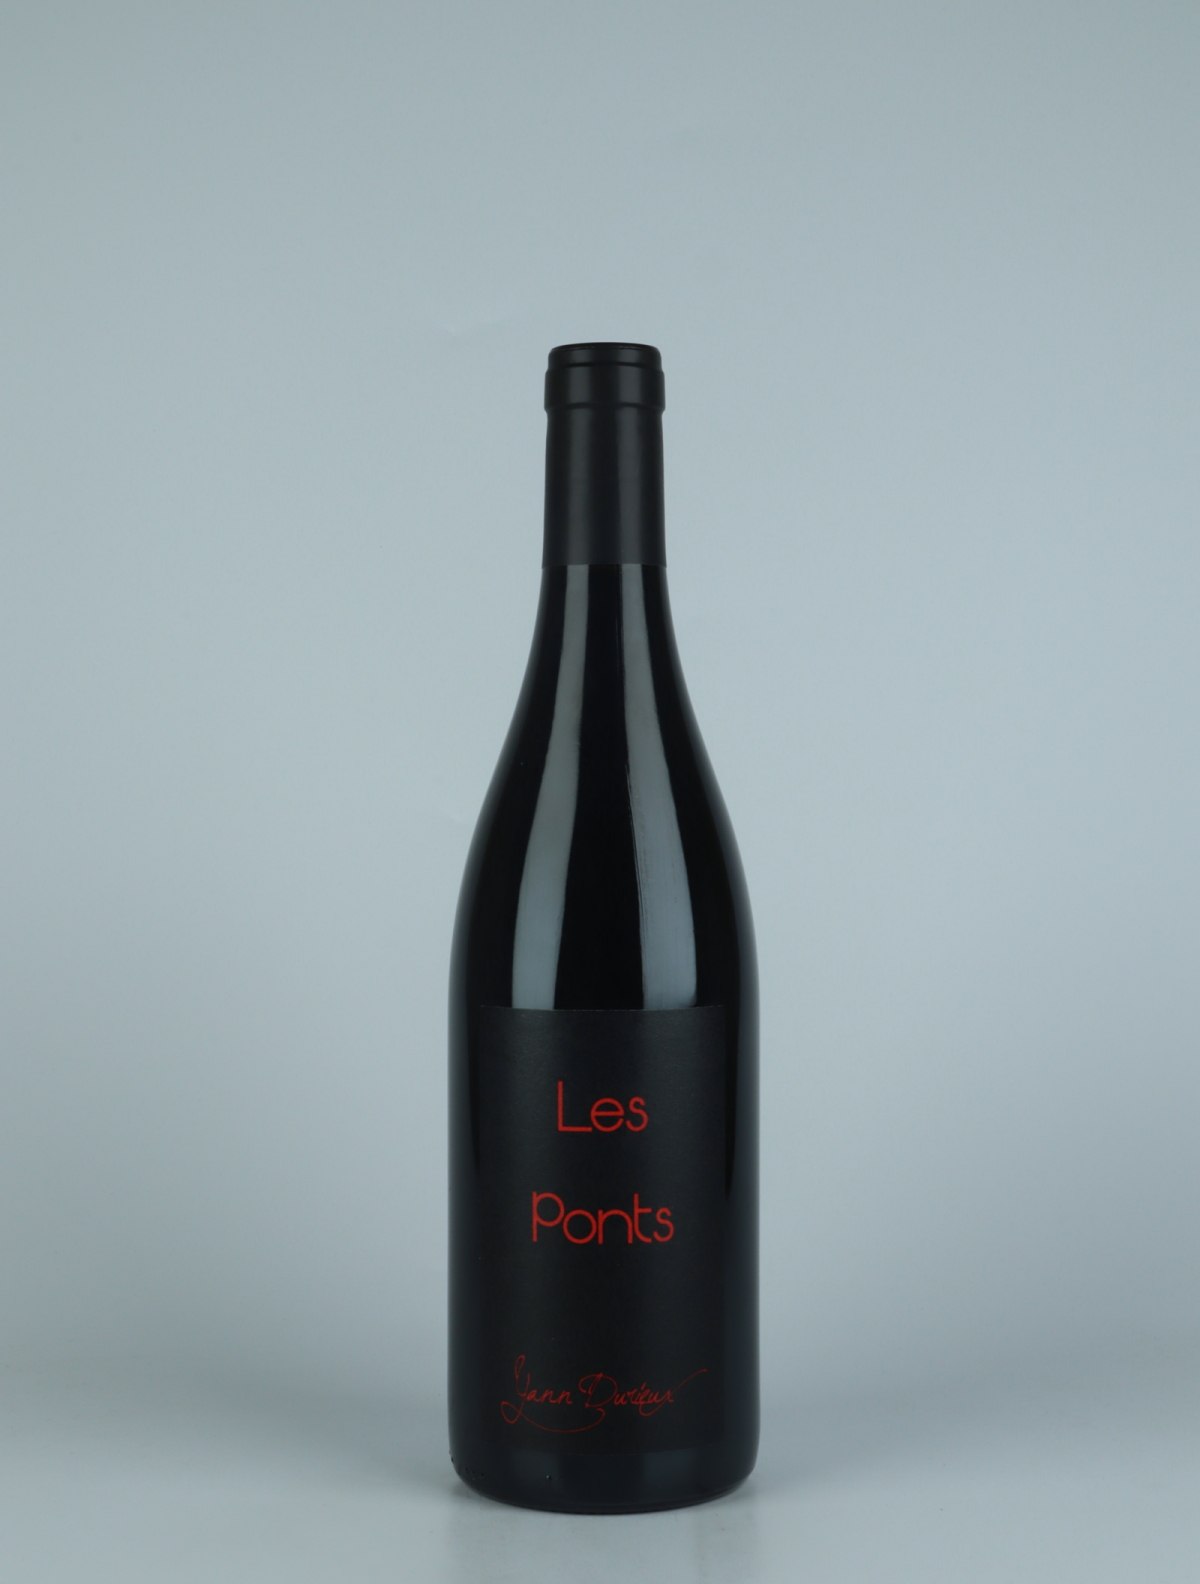 A bottle 2020 Les Ponts Red wine from Yann Durieux, Burgundy in France